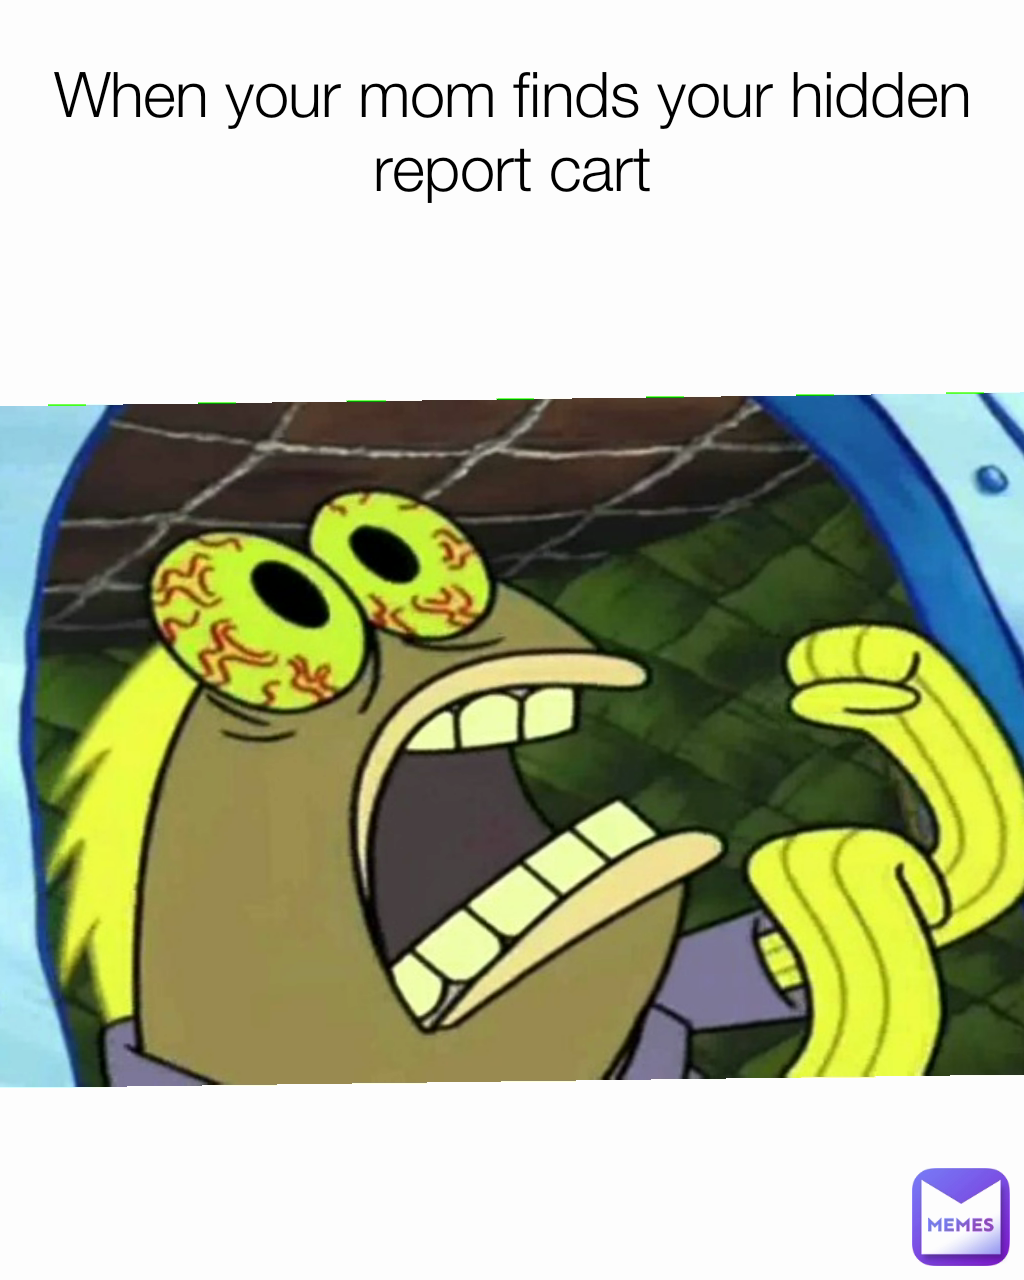 When Your Mom Finds Your Hidden Report Cart Jjsolitty Memes